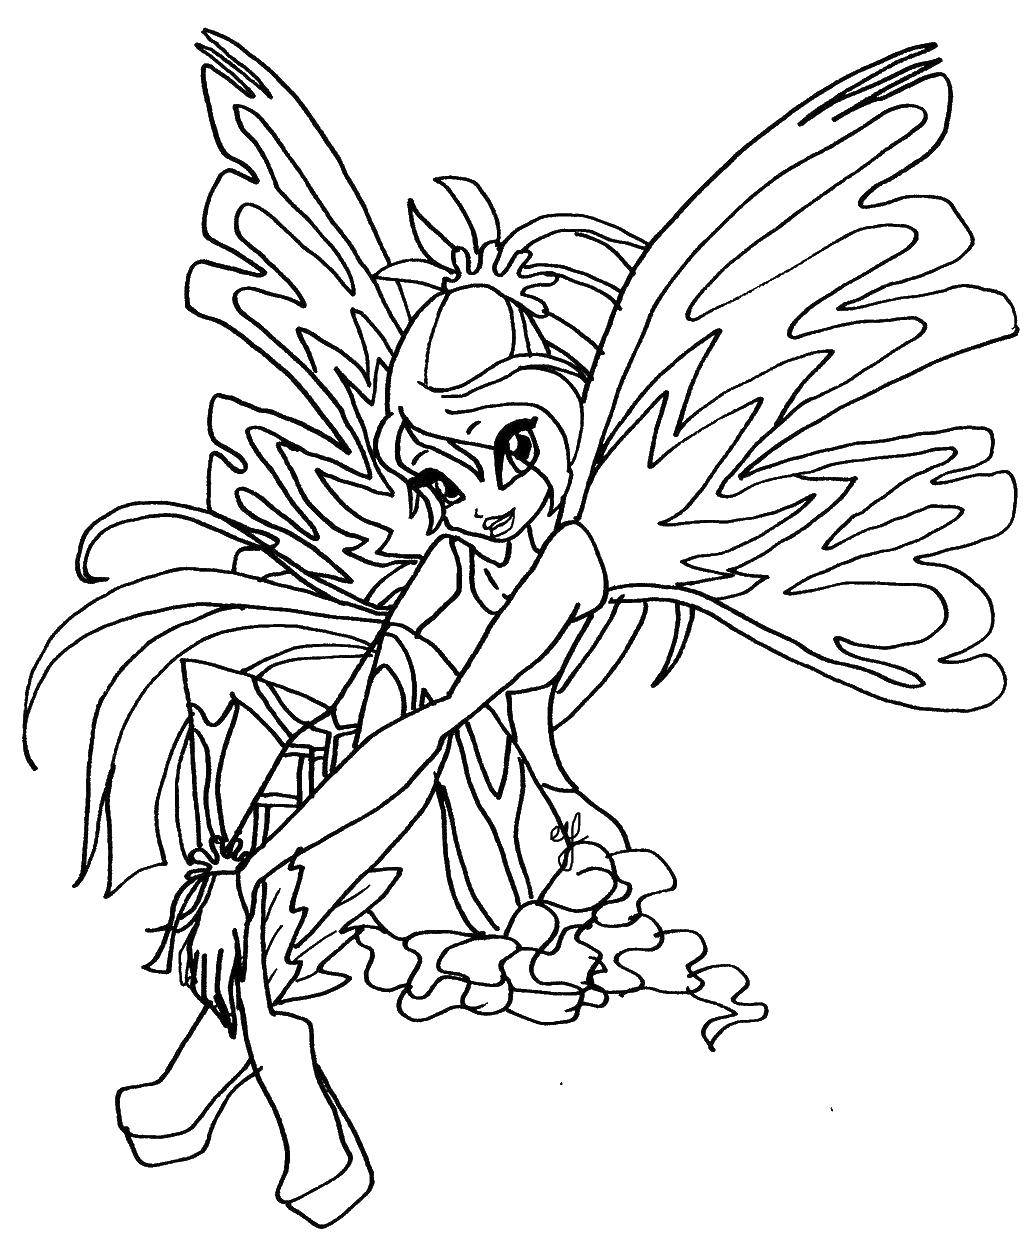 Coloring Bloom and charmix. Category Winx. Tags:  BLOOM, Fairy, Winx.